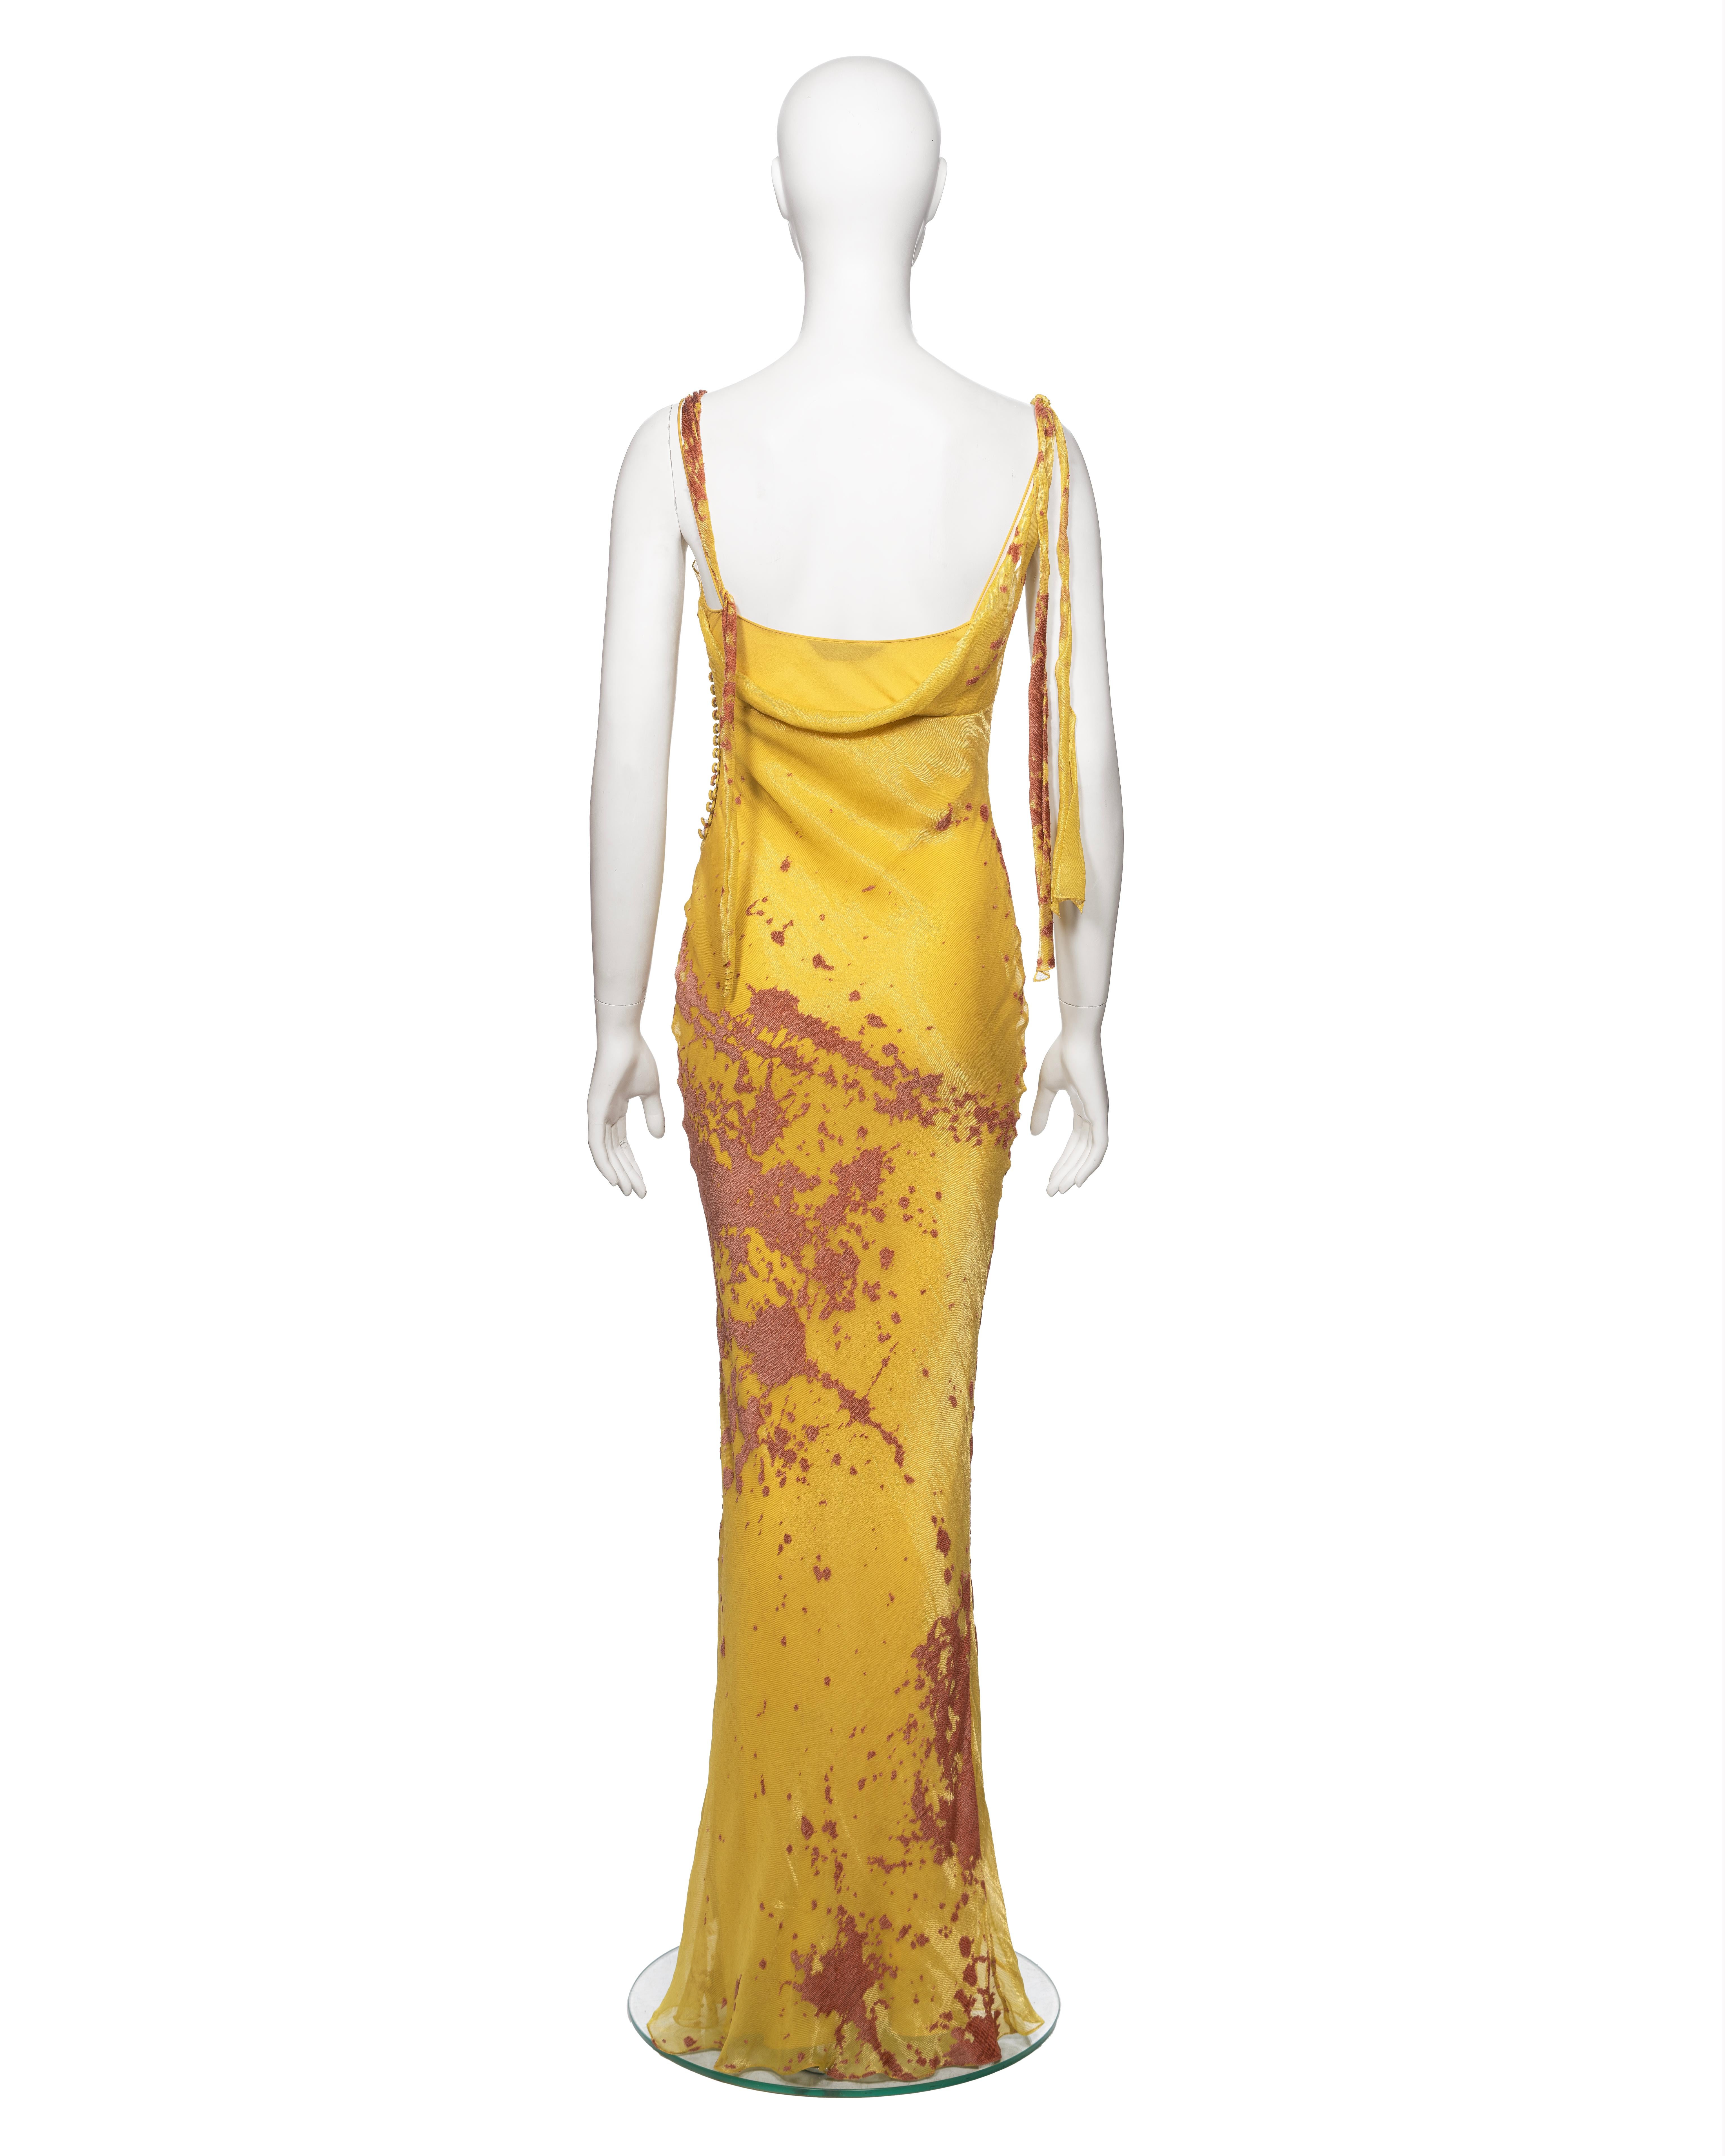 John Galliano Metallic Yellow and Peach Lamé and Silk Evening Dress, FW 2000 For Sale 4